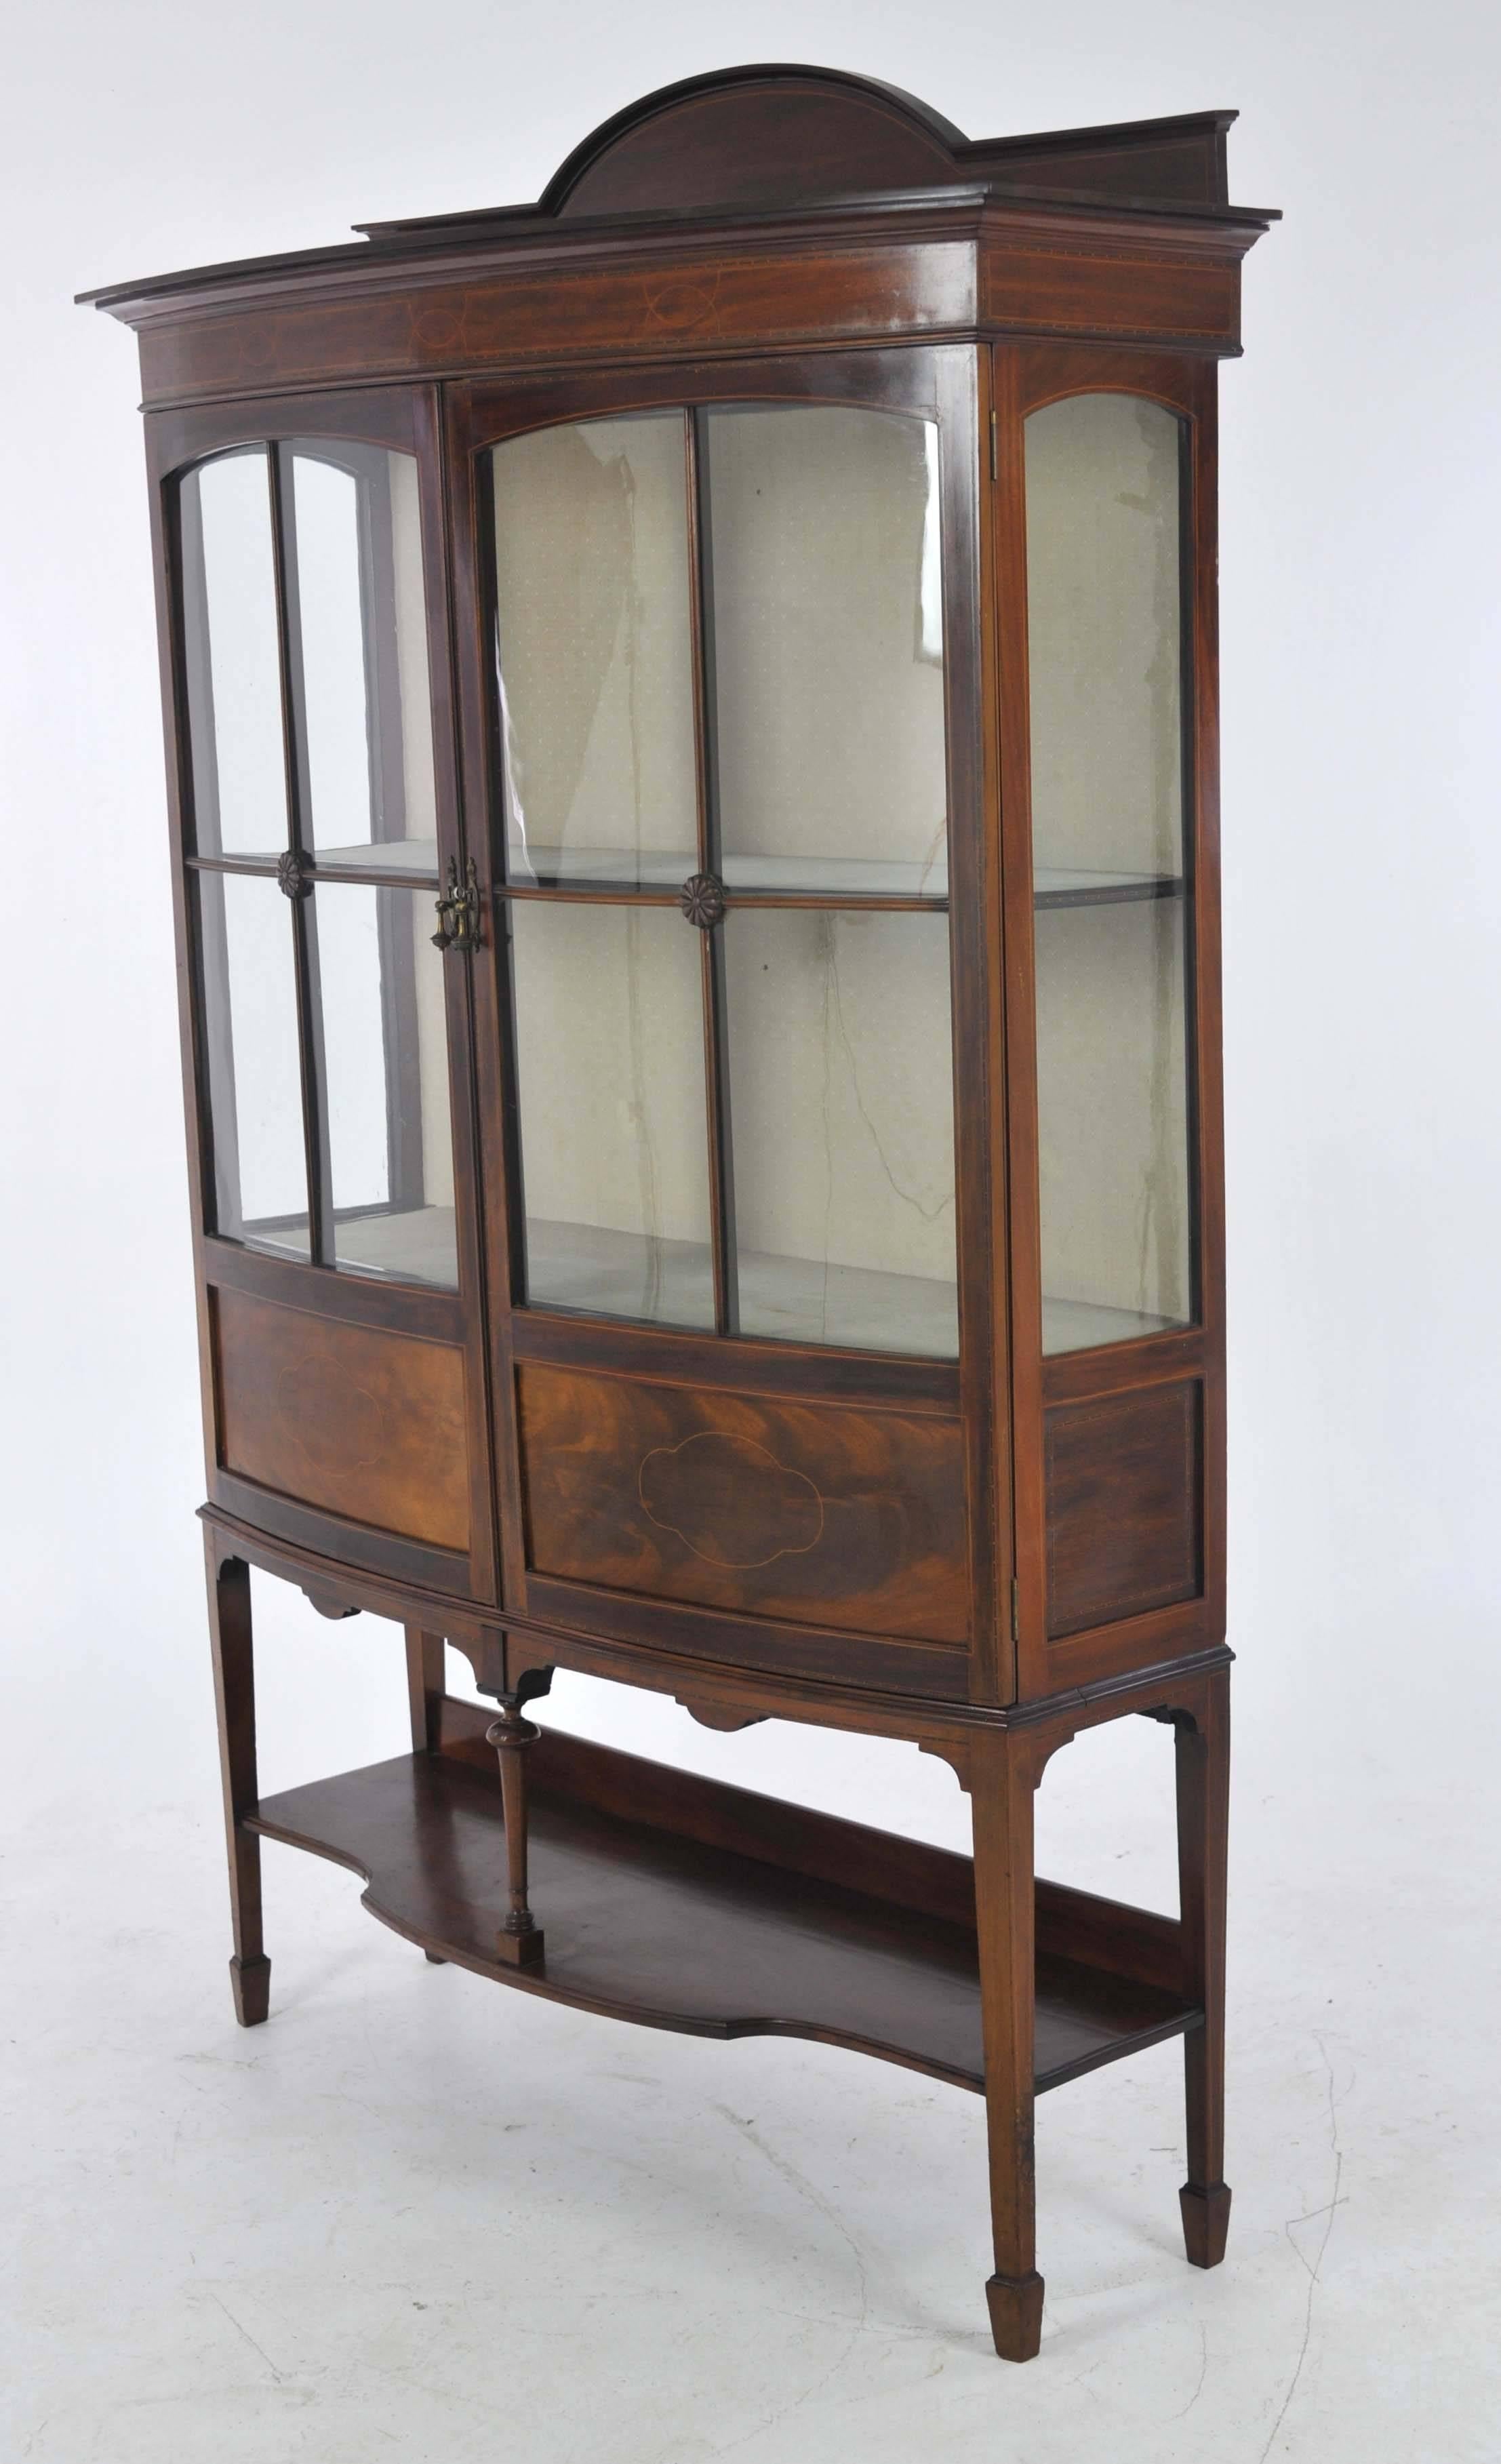 Hand-Crafted Antique China Cabinet, Inlaid Walnut, Bow Front Cabinet, Scotland, 1910